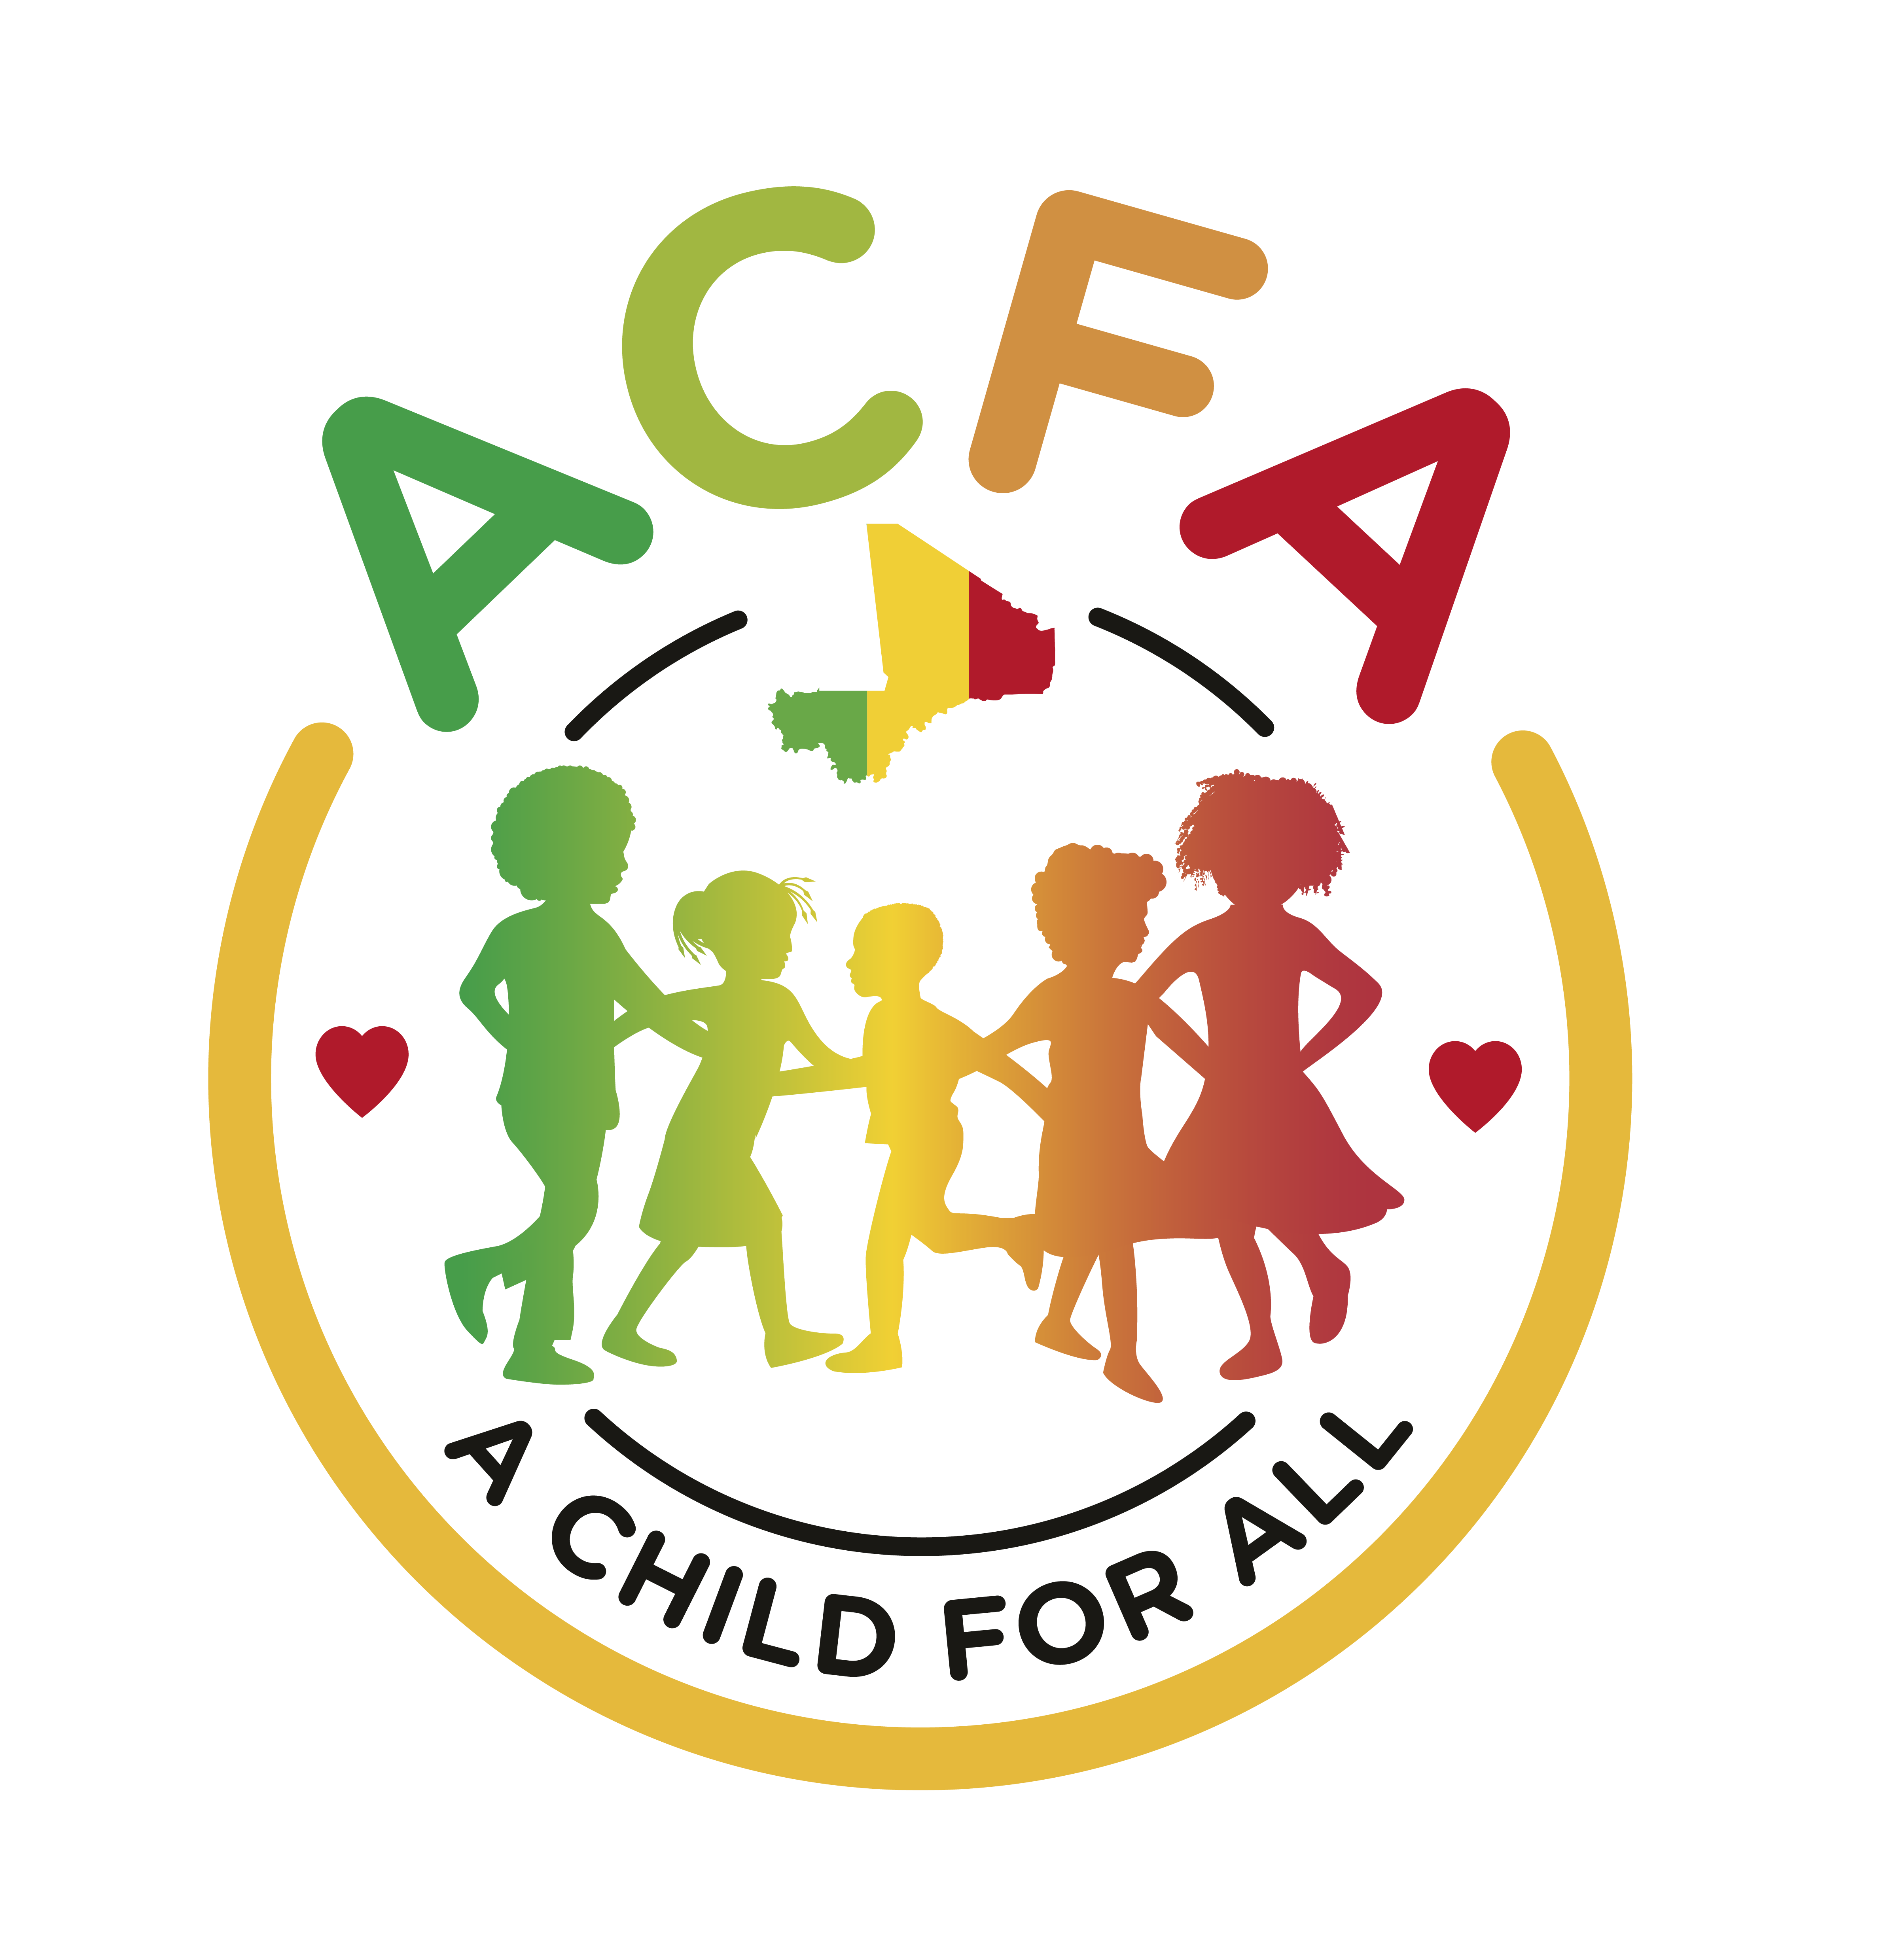 A Child for All logo